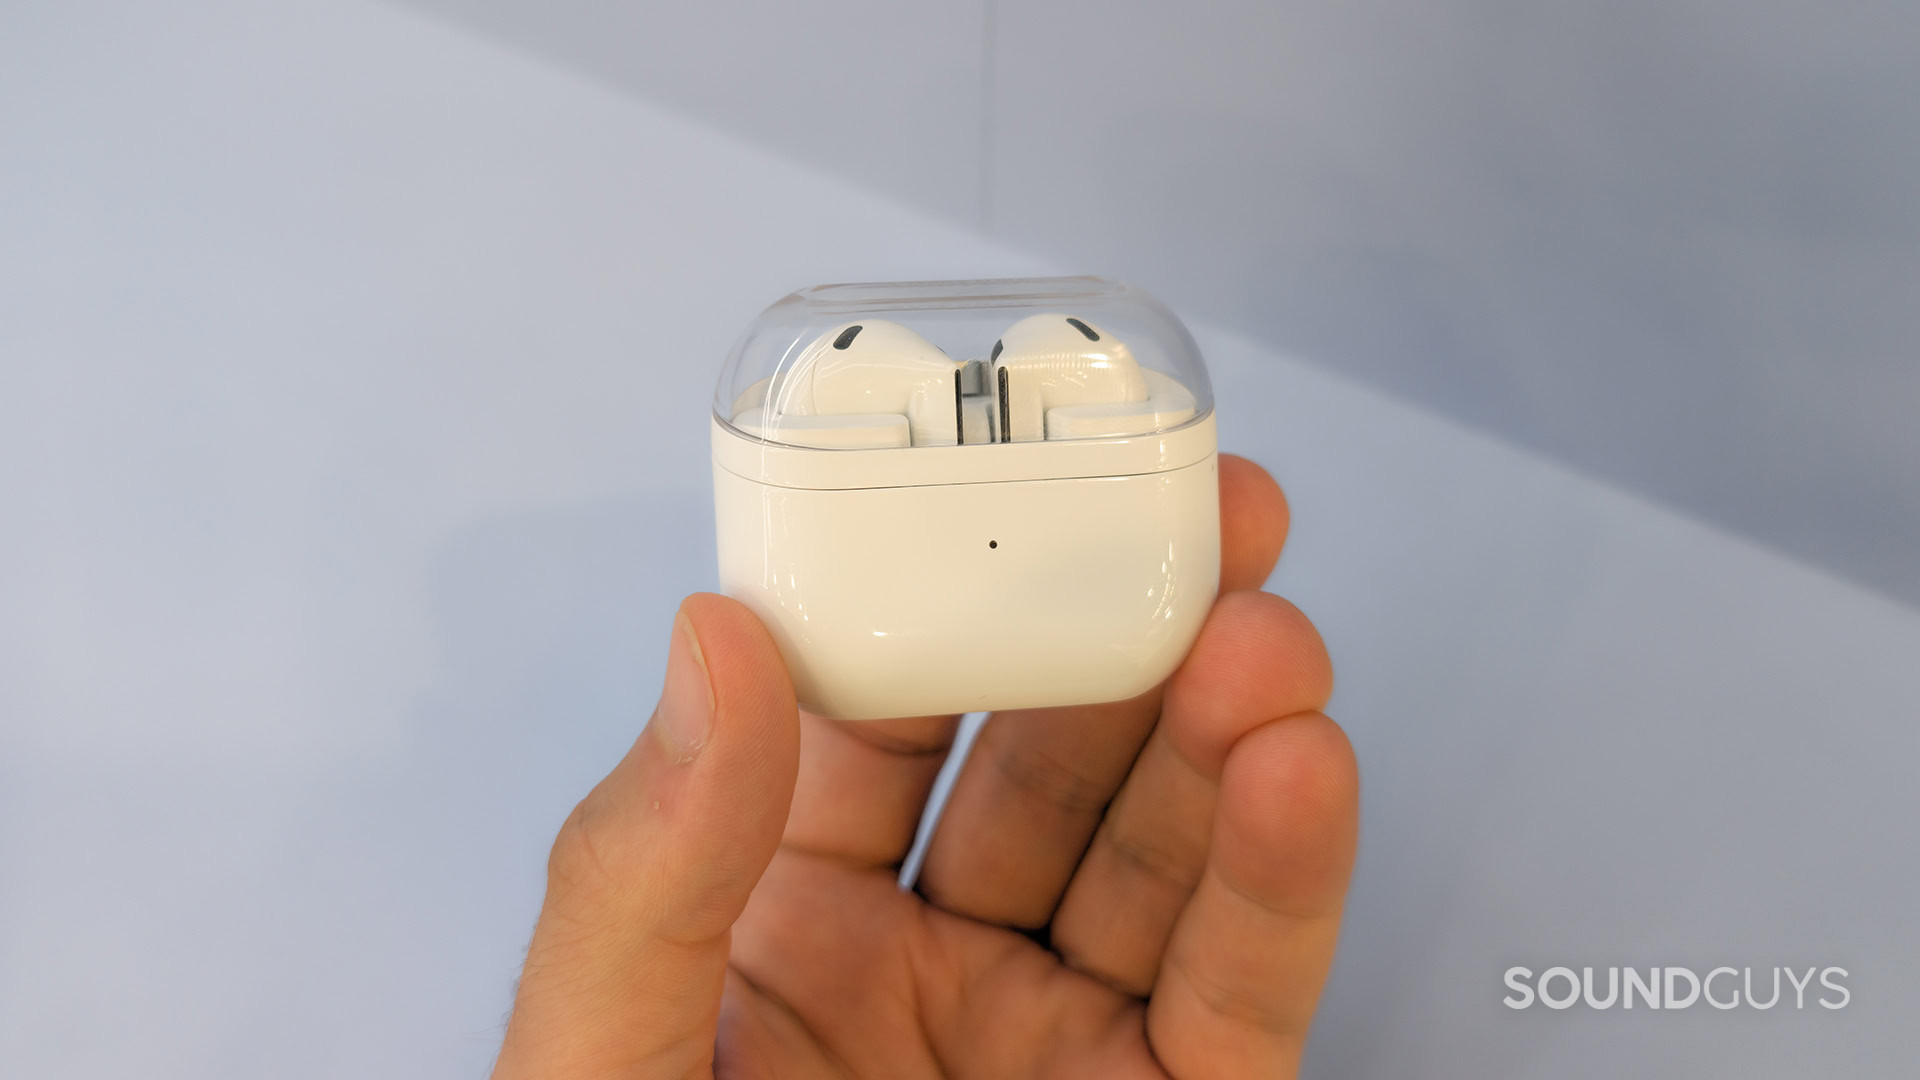 The Samsung Galaxy Buds 3 inside their charging case.